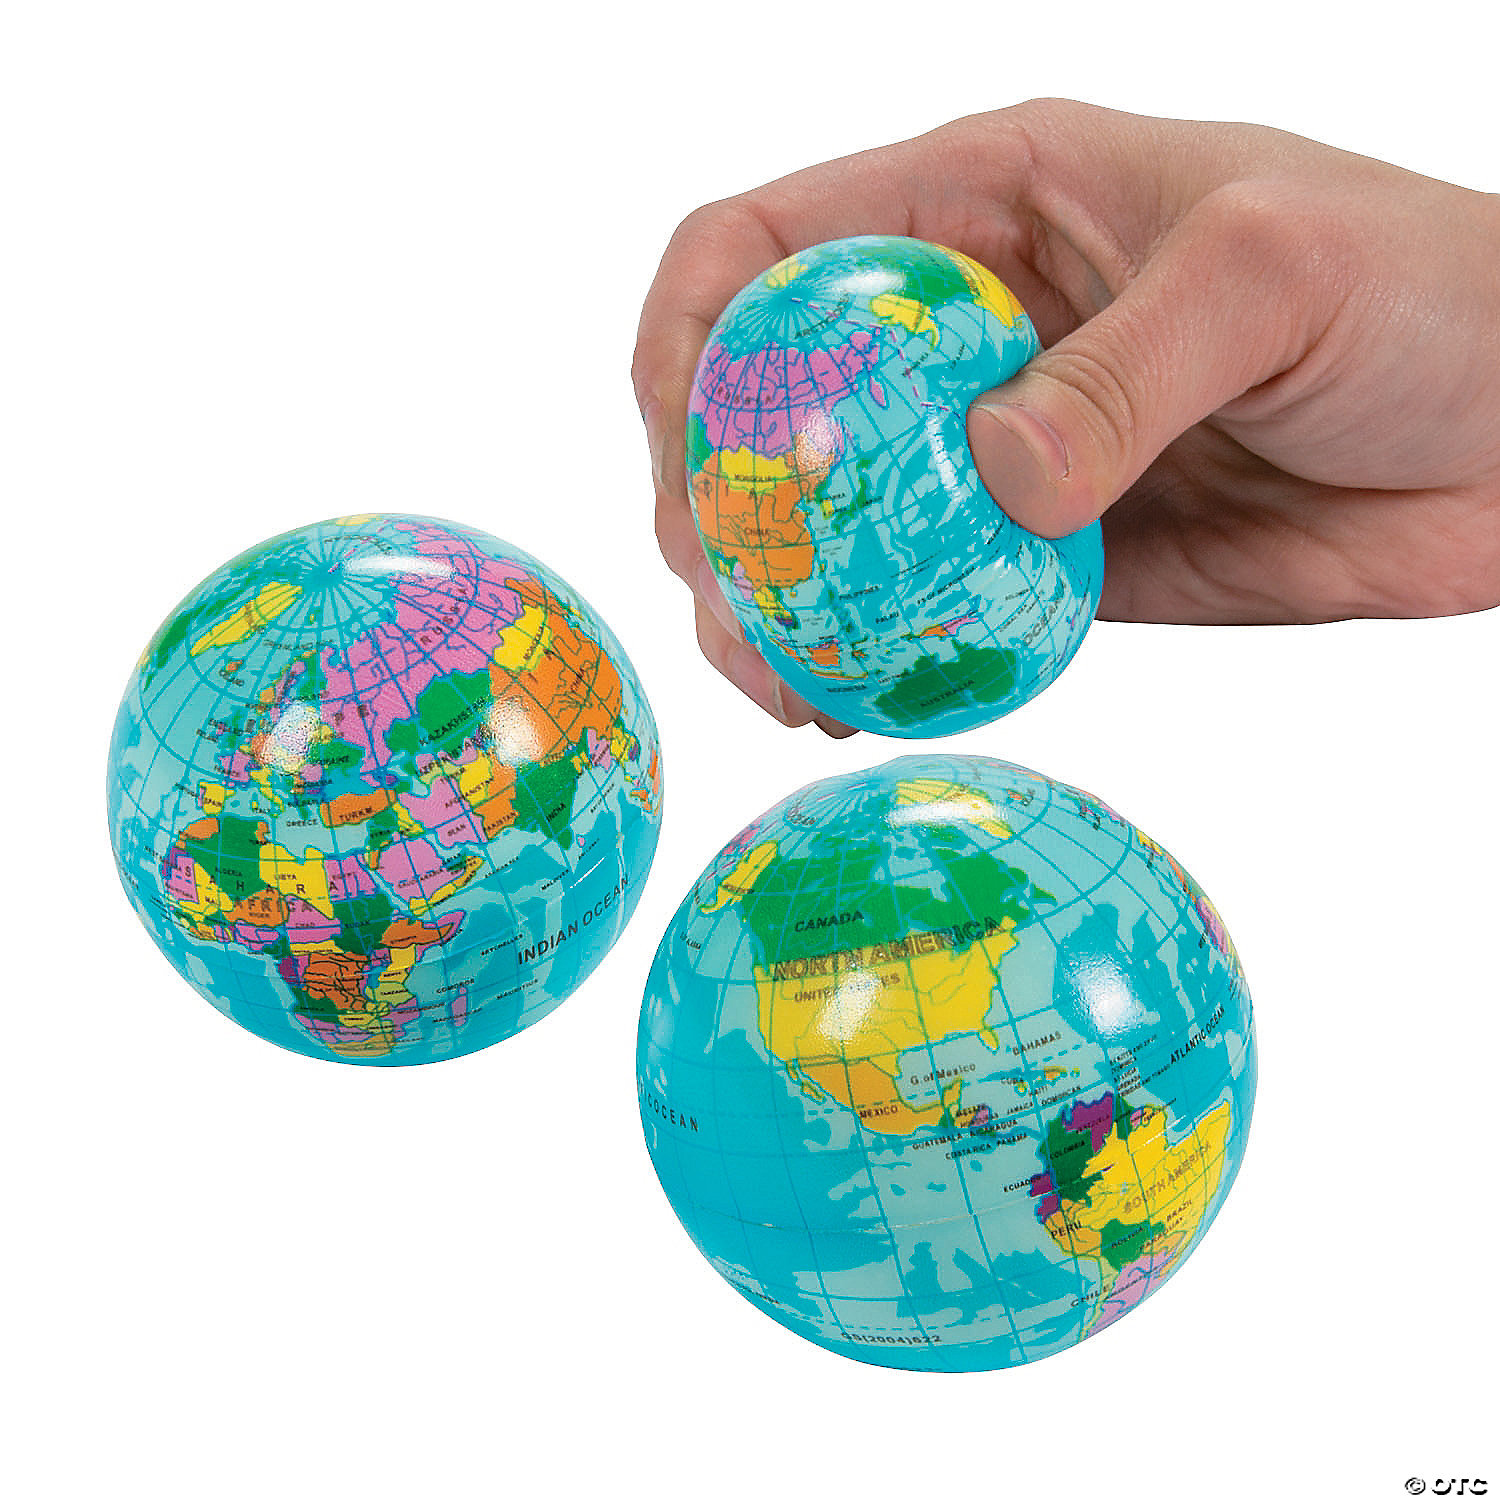 Wang-Data Squeezable World Stress Balls for Kids Mini World Globe Earth Ball 24 Pack School Party Favors Classroom Pressure Relieving Health Balls Globe Pattern Balls for Kids 2.5 Inches 